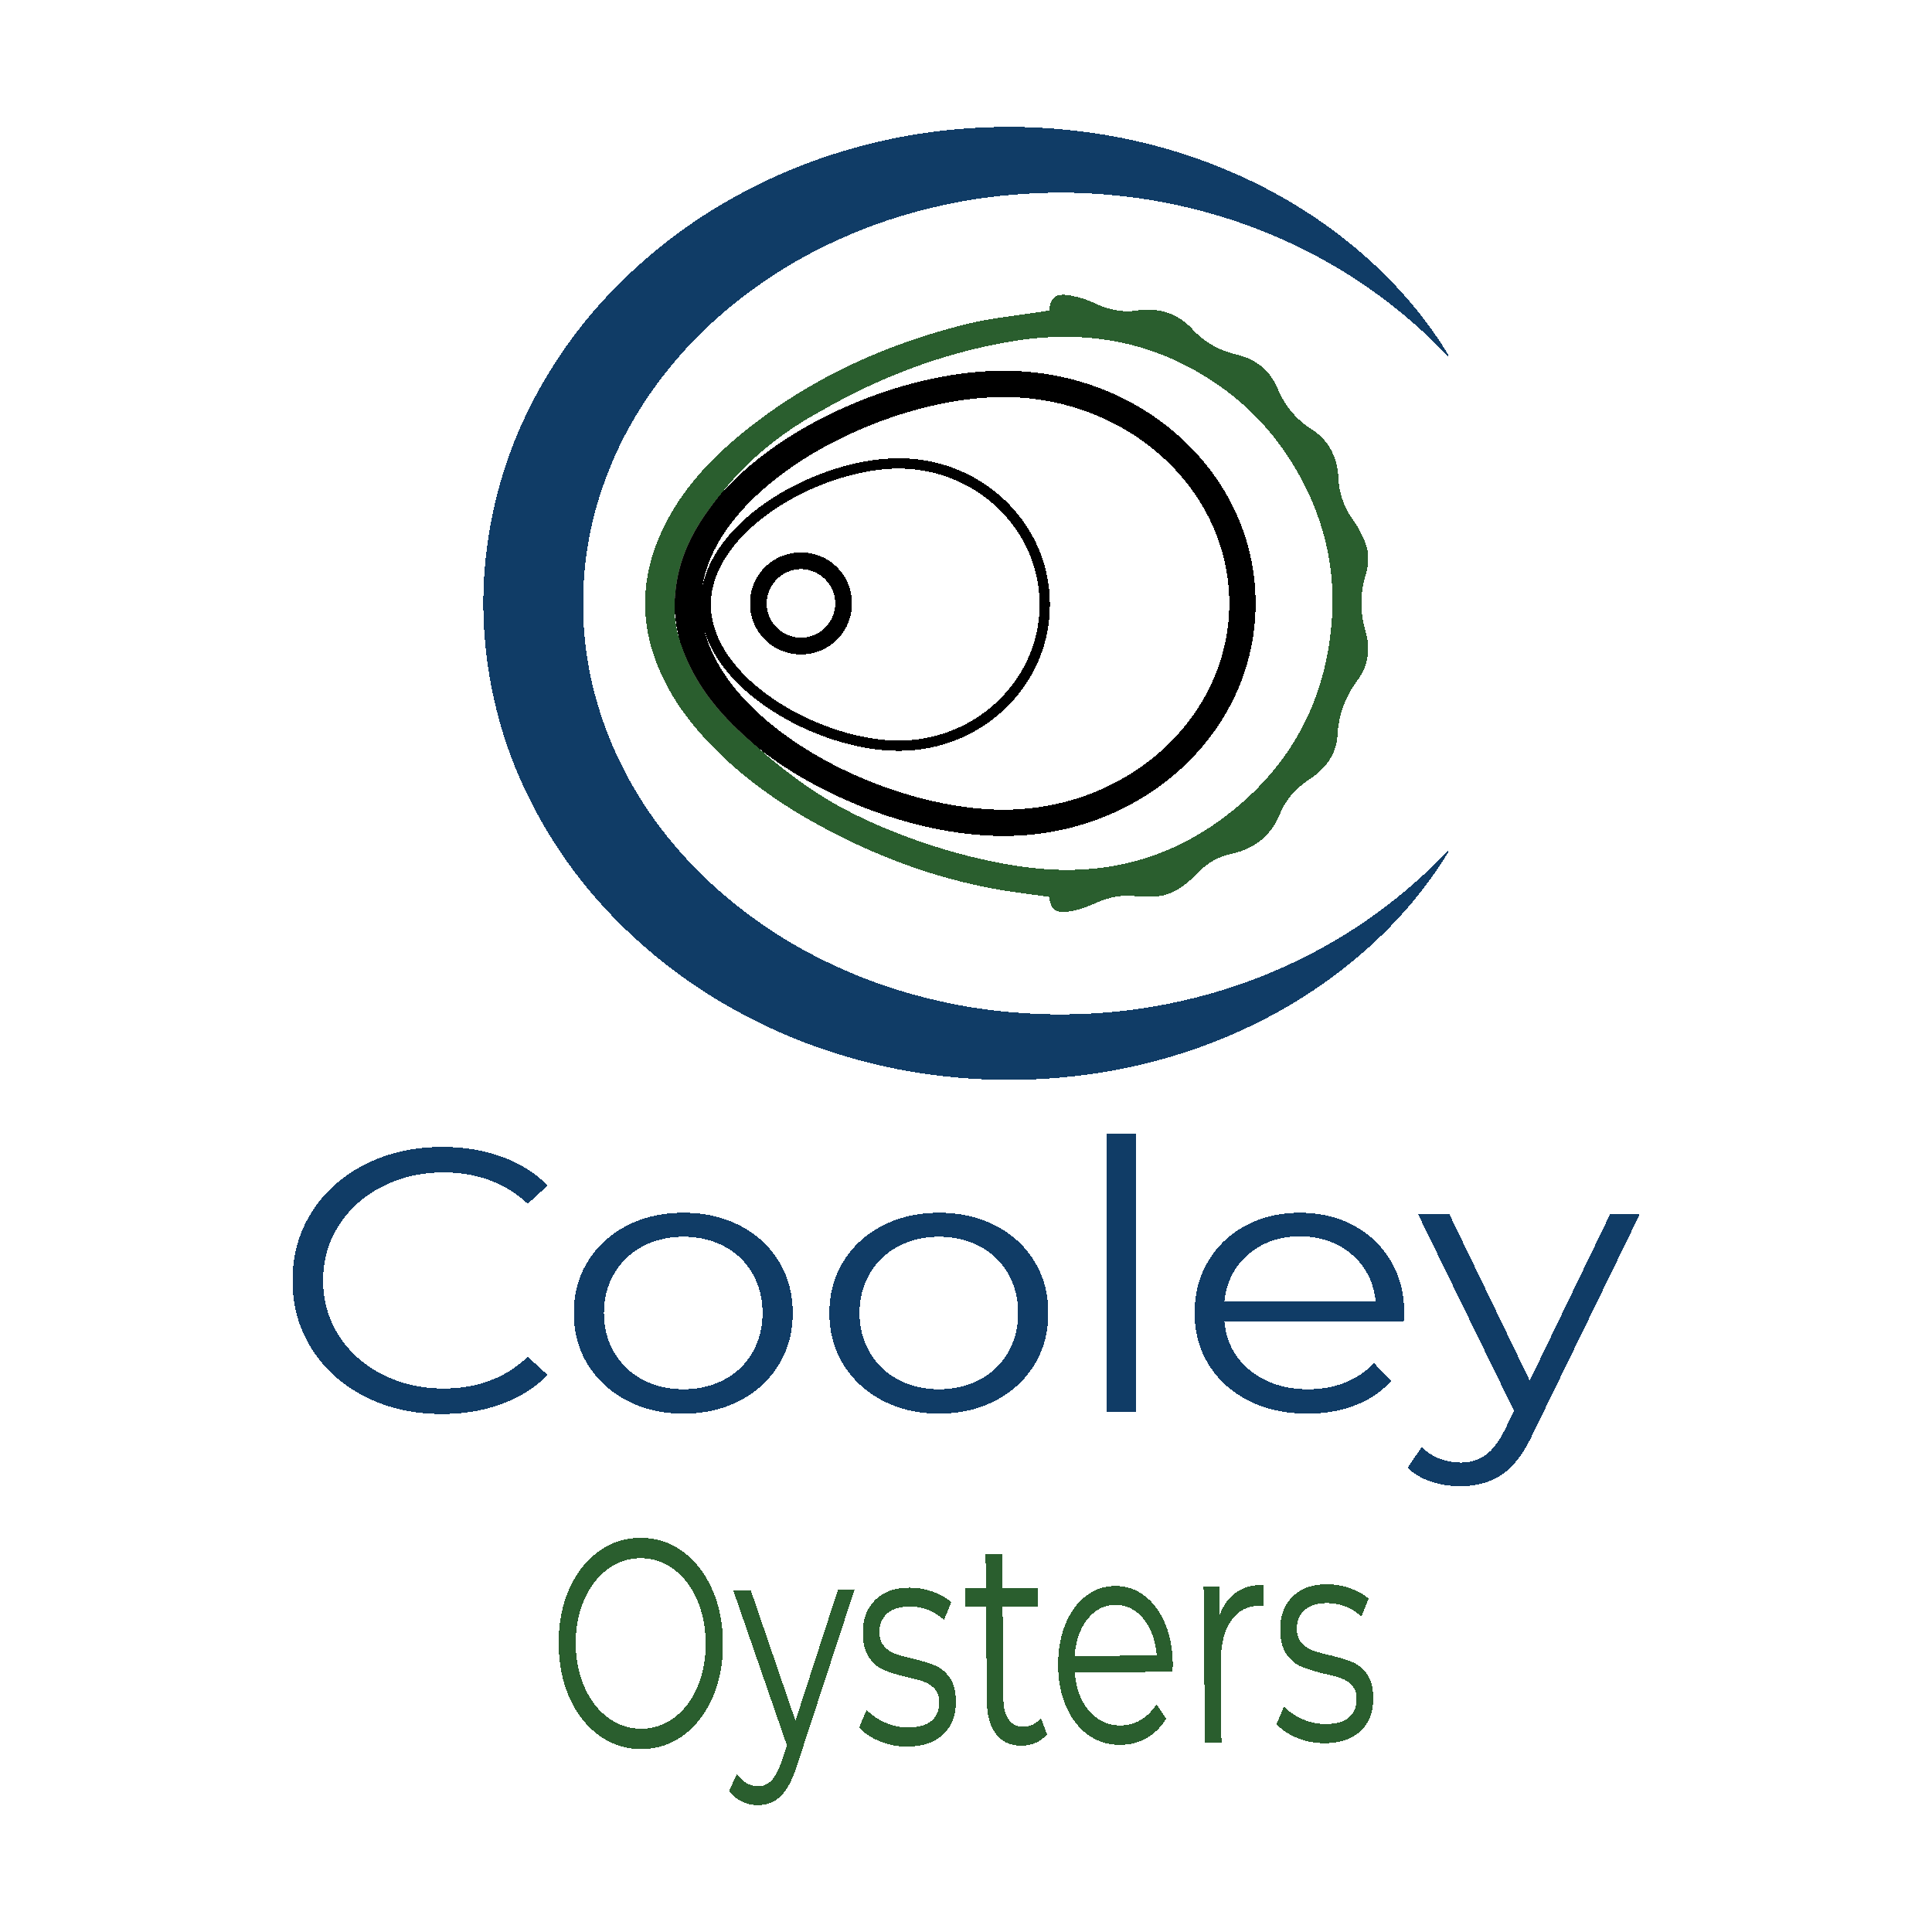 Image of Cooley Oysters Ltd logotype